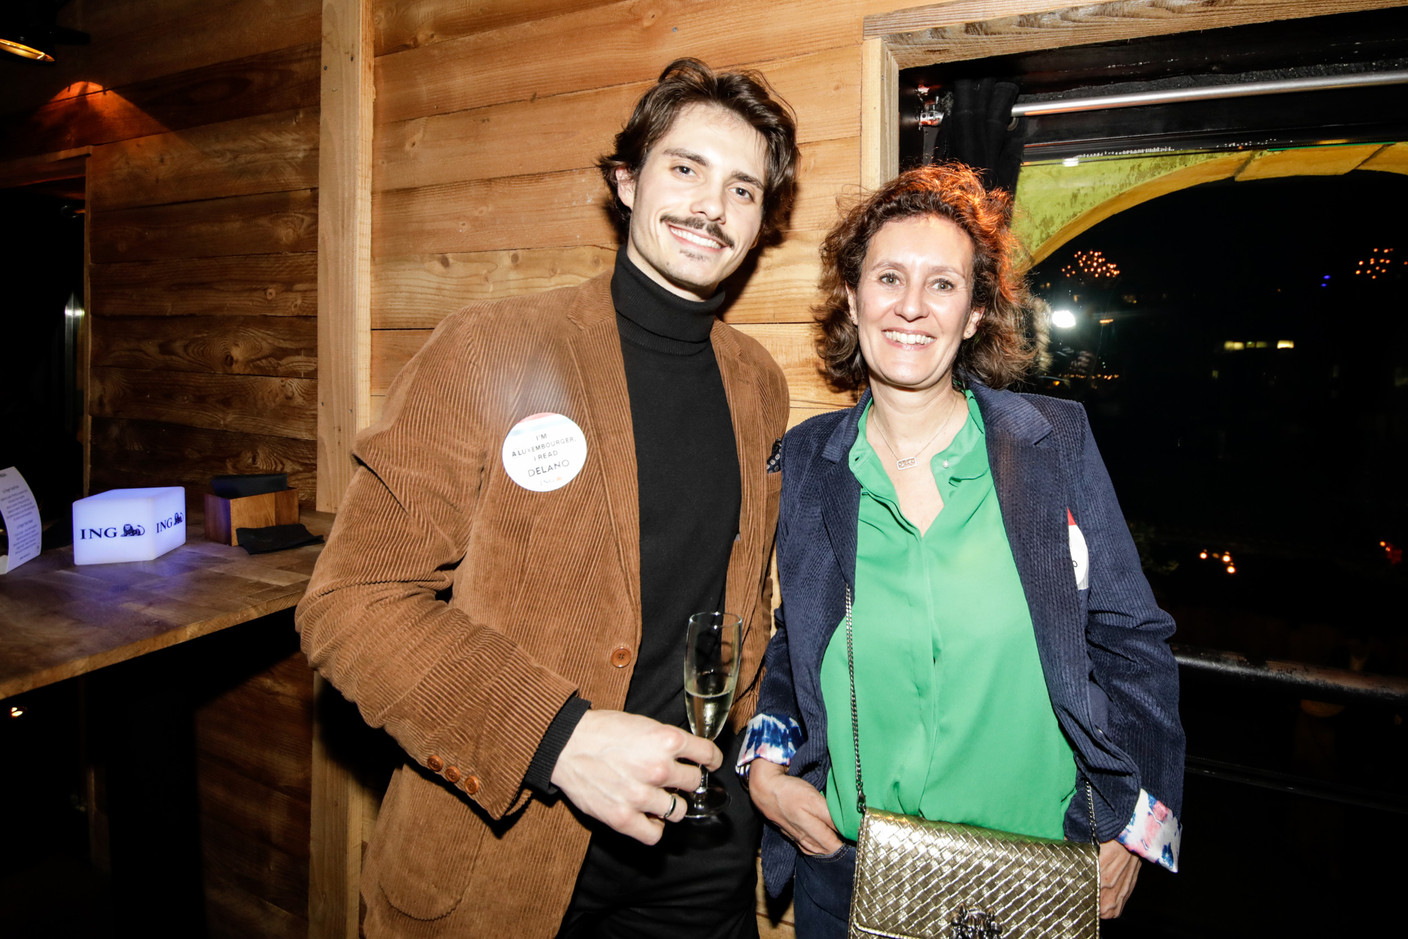 Delano’s 12th anniversary party was held at Melusina, 23 February 2023. Photo: Marie Russillo/Maison Moderne